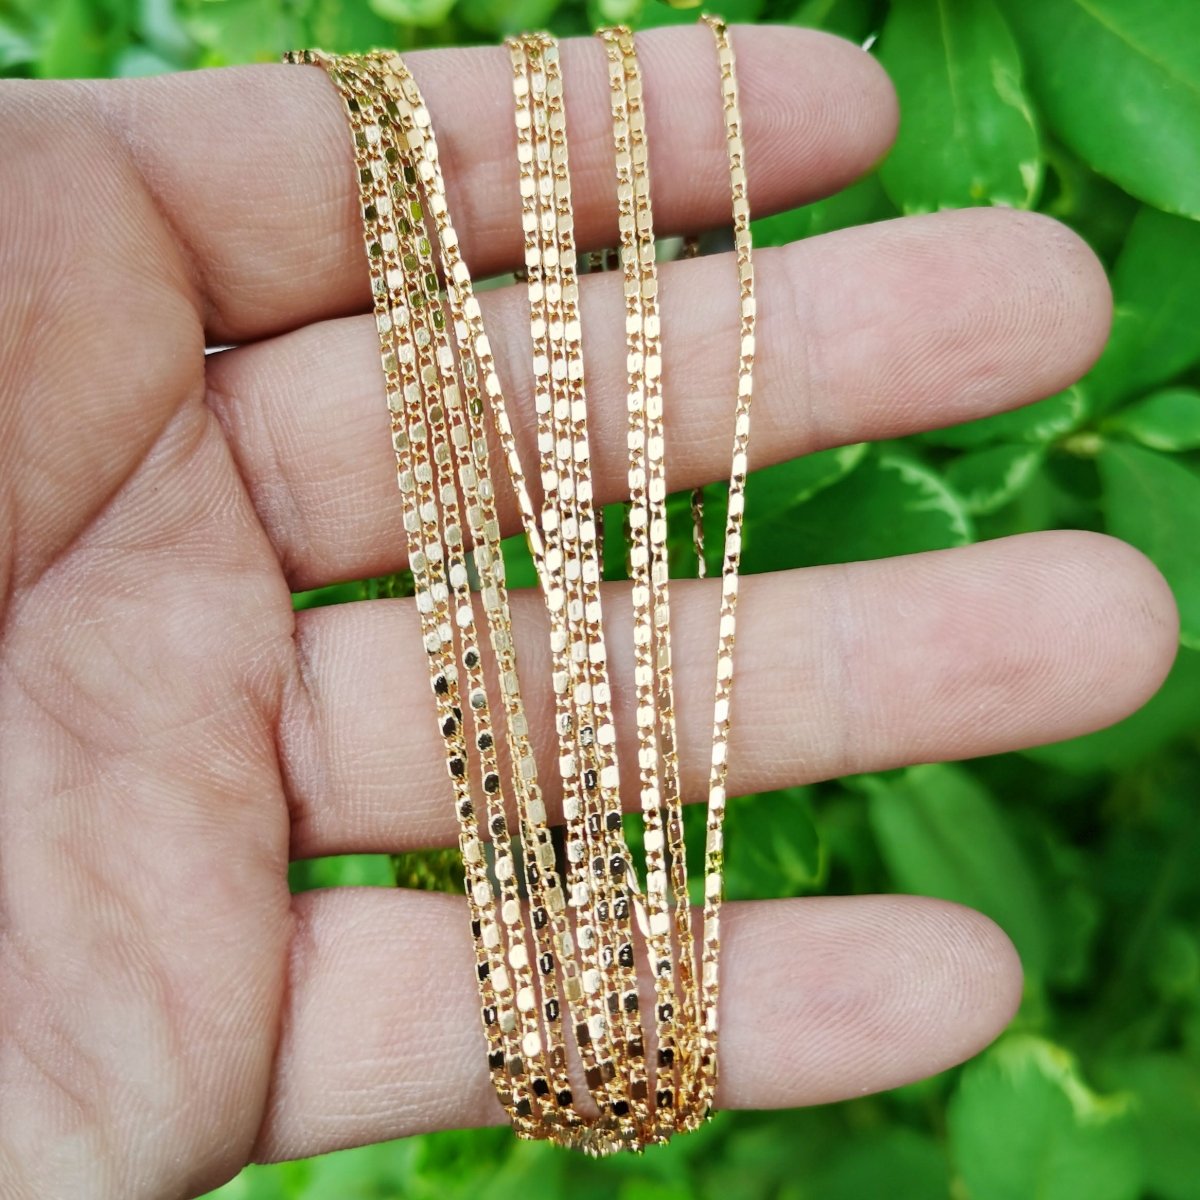 24K Gold Plated Scroll Chain 17.6" Width 1.3mm Jewelry Findings For Jewelry Making Supply Finished Chain for Necklace - Unique Necklace w/ Spring Rings | CN-820 Clearance Pricing - DLUXCA